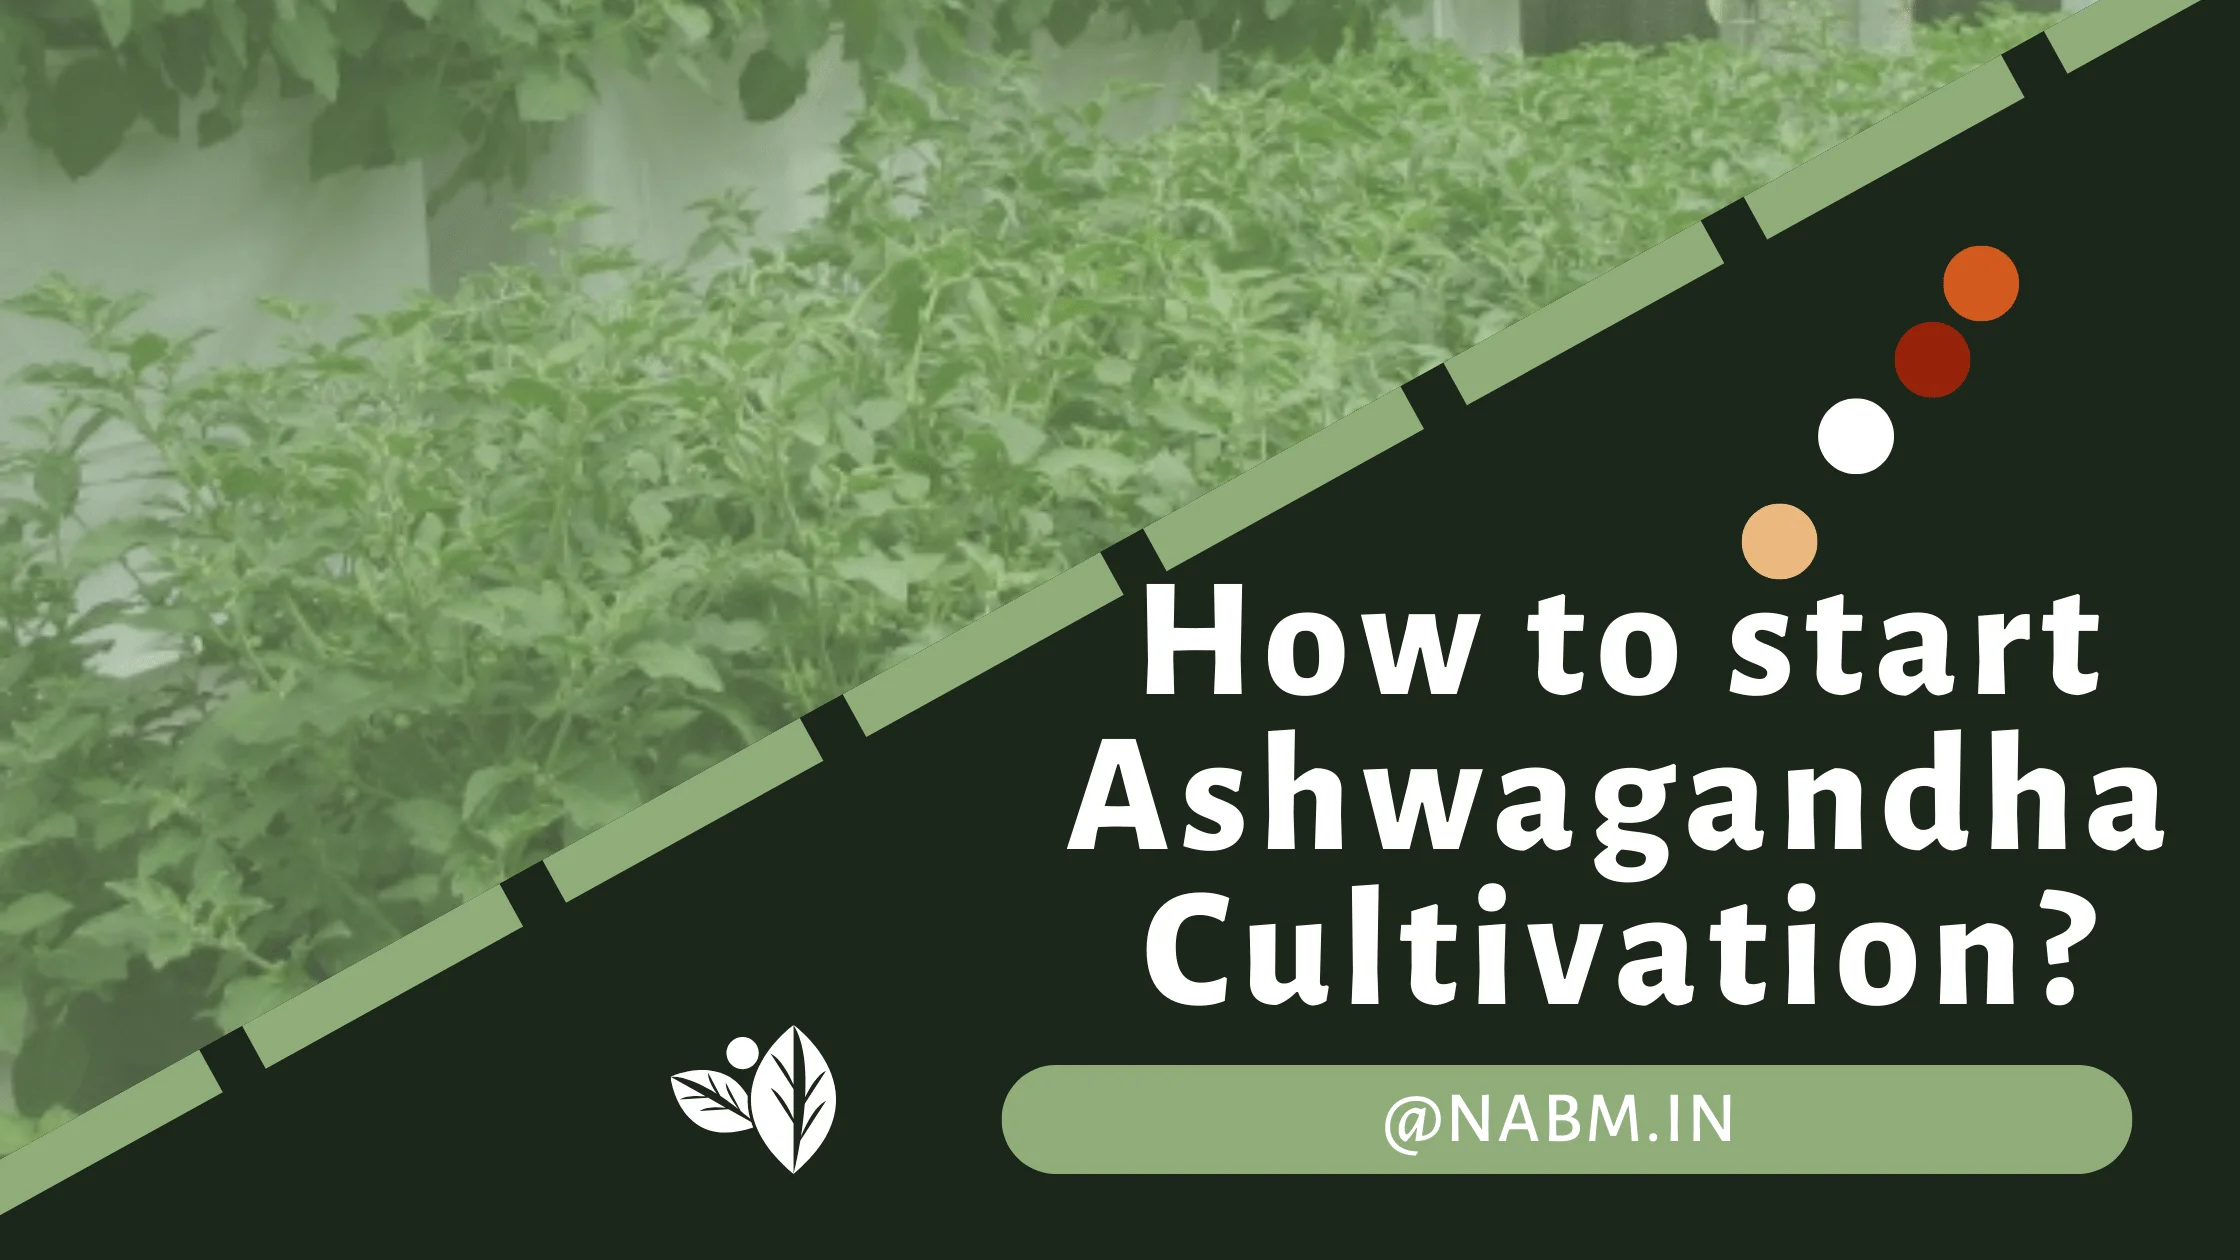 How to start Ashwagandha Cultivation?